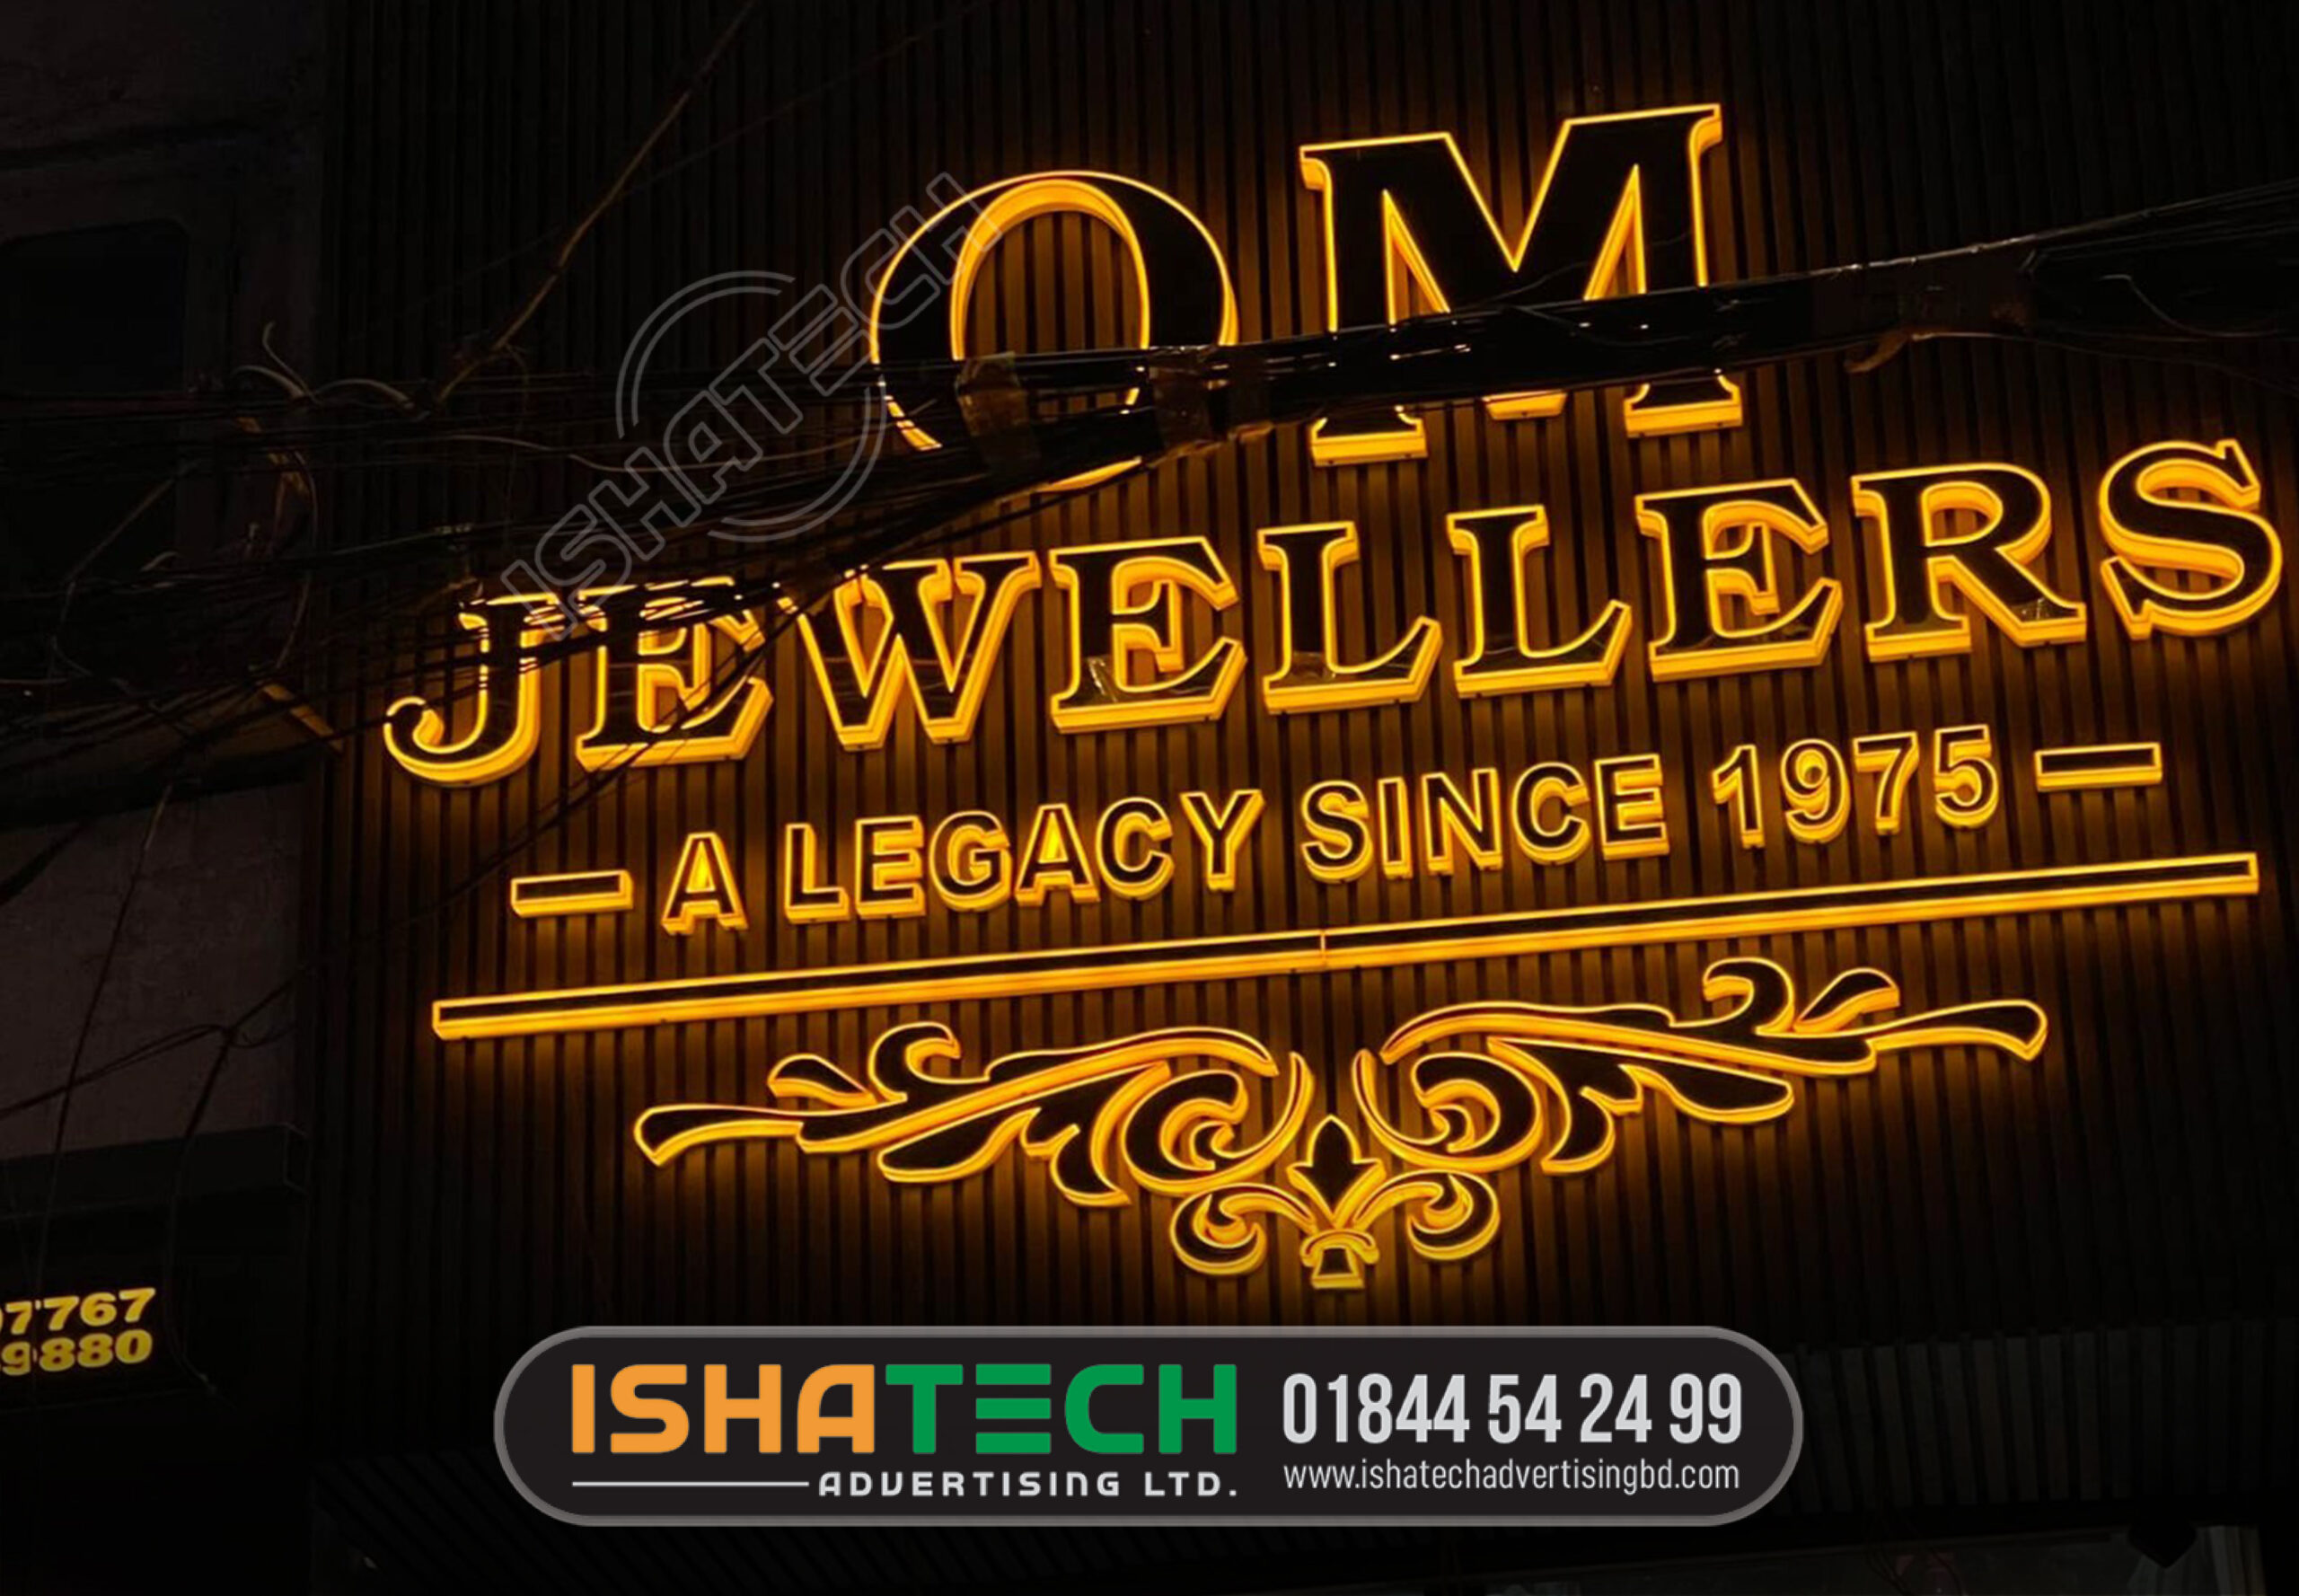 OM JEWELLERS A LEGACY SINCE 1975 LIGHTING LETTER NAMEPLATE SIGNAGE MAKING BY ISHATECH ADVERTISING LTD